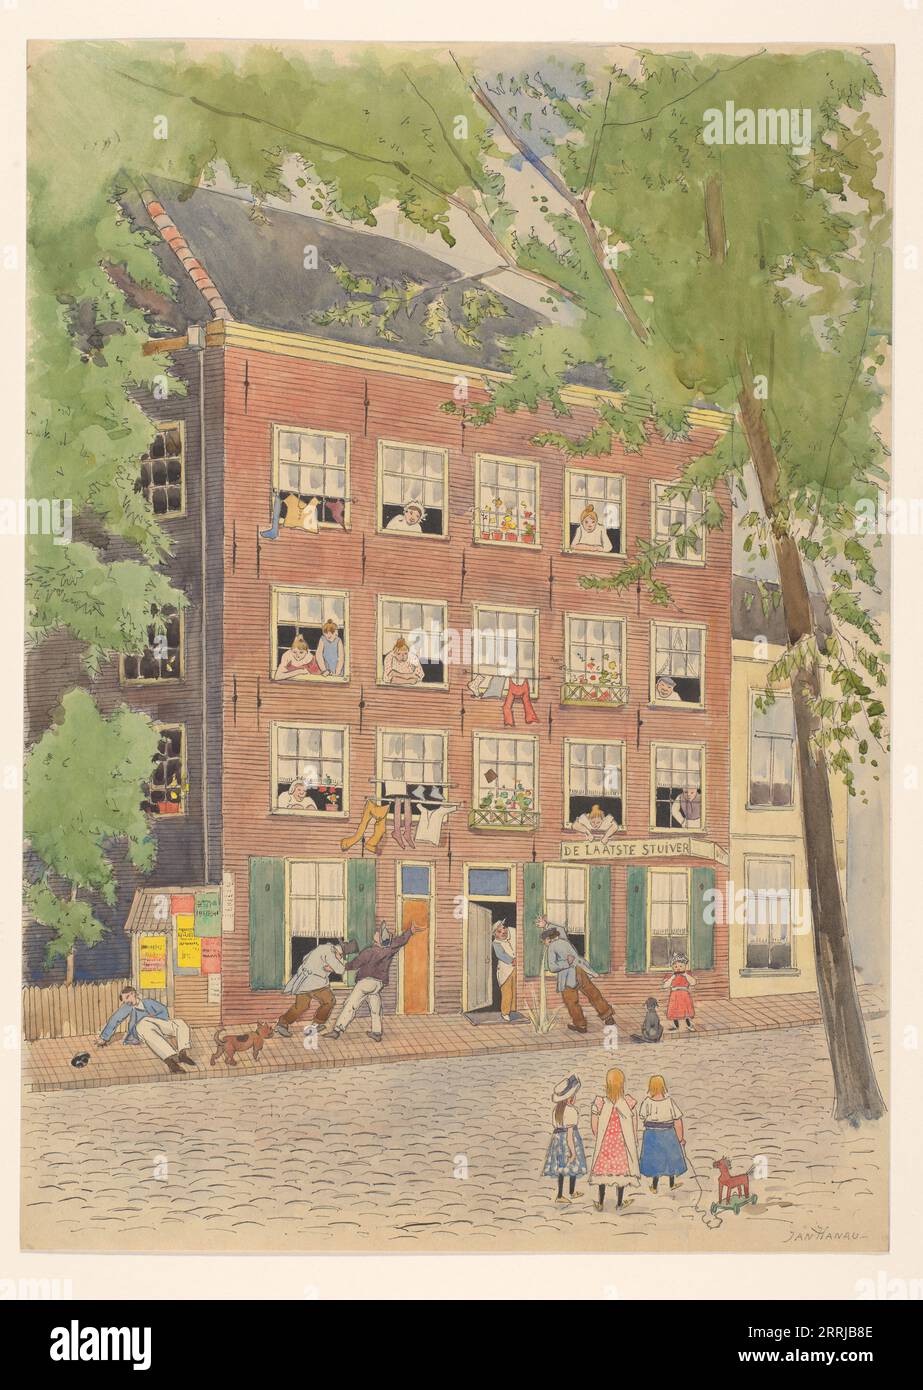 Drunks outside 'De Laatste Stuiver', 1874-1916. Drunk men vomit and fall over on the pavement outside The Last Penny cafe, bystanders watch from windows above. Stock Photo